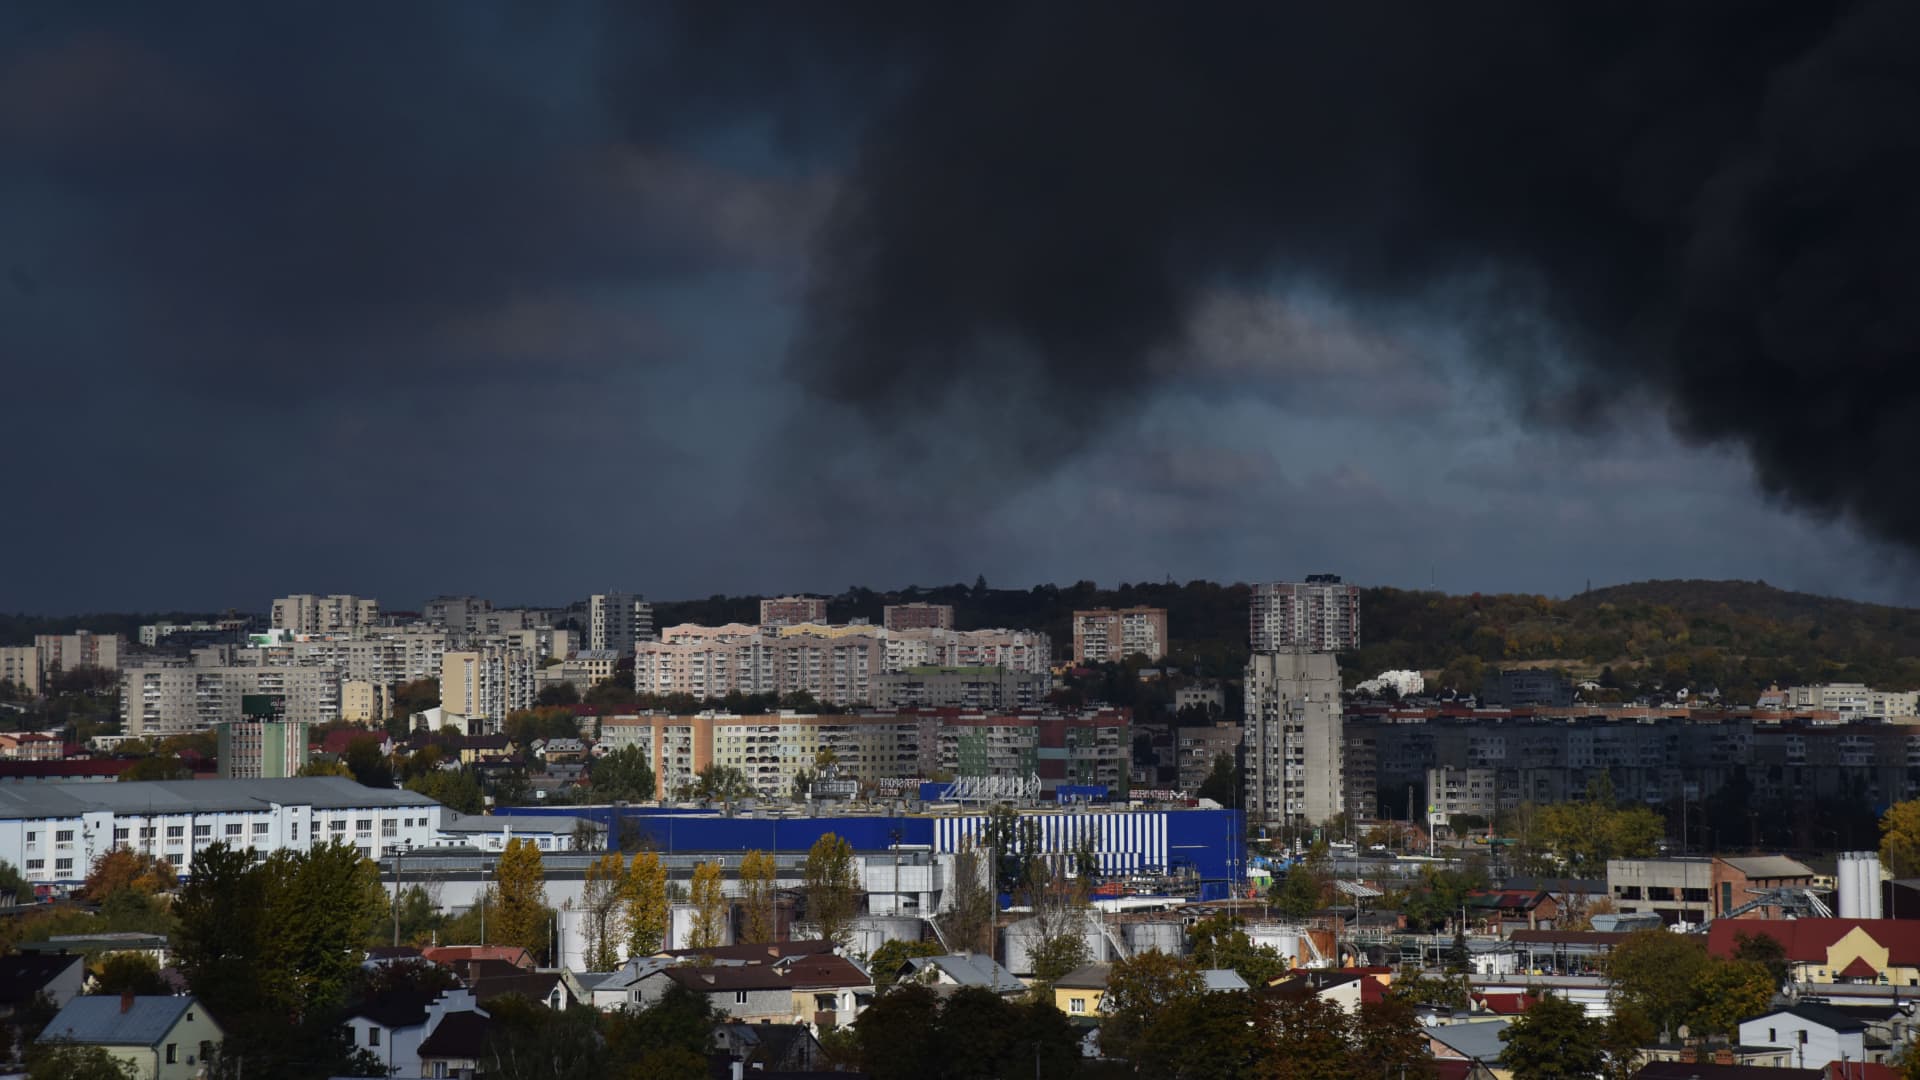 Smoke rises above the buildings after the Russian missile attack on the critical infrastructure of Lviv on Oct. 10, 2022. Russia launched 15 rockets in the Lviv region, some were shot down by air defense forces, the rest hit energy infrastructure facilities. Due to the rocket attack, Lviv was left without electricity, water and mobile communication.